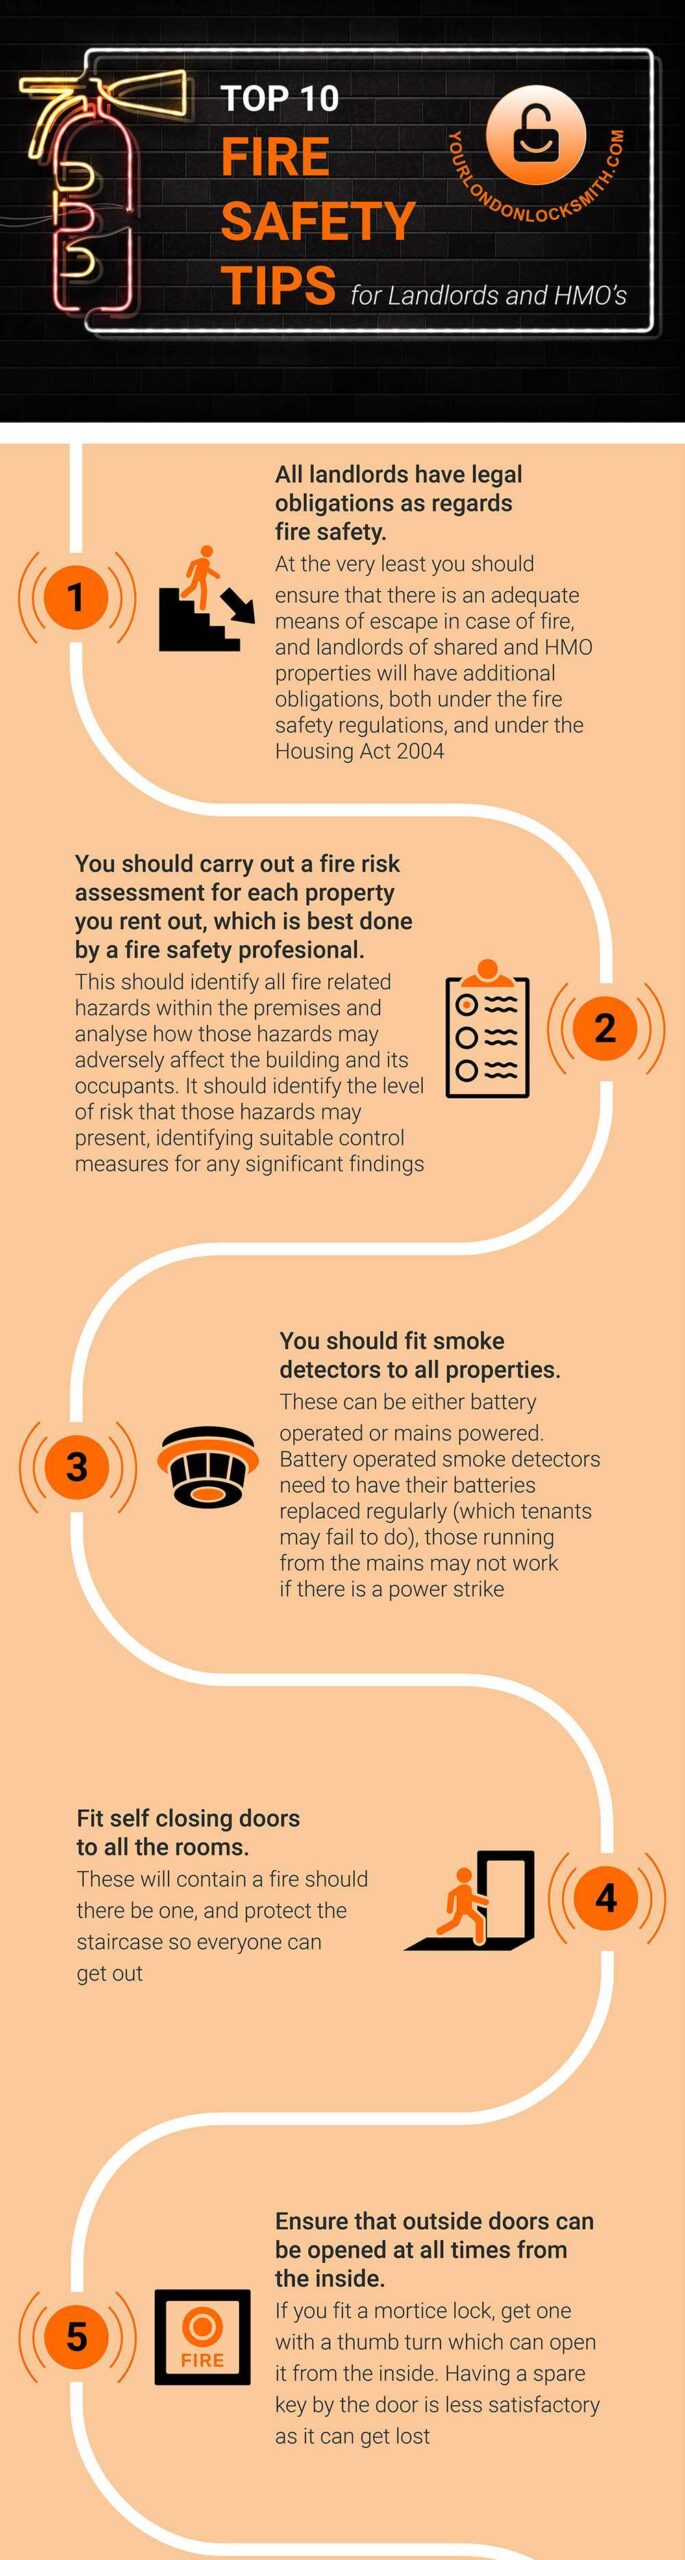 fire-safety-tips